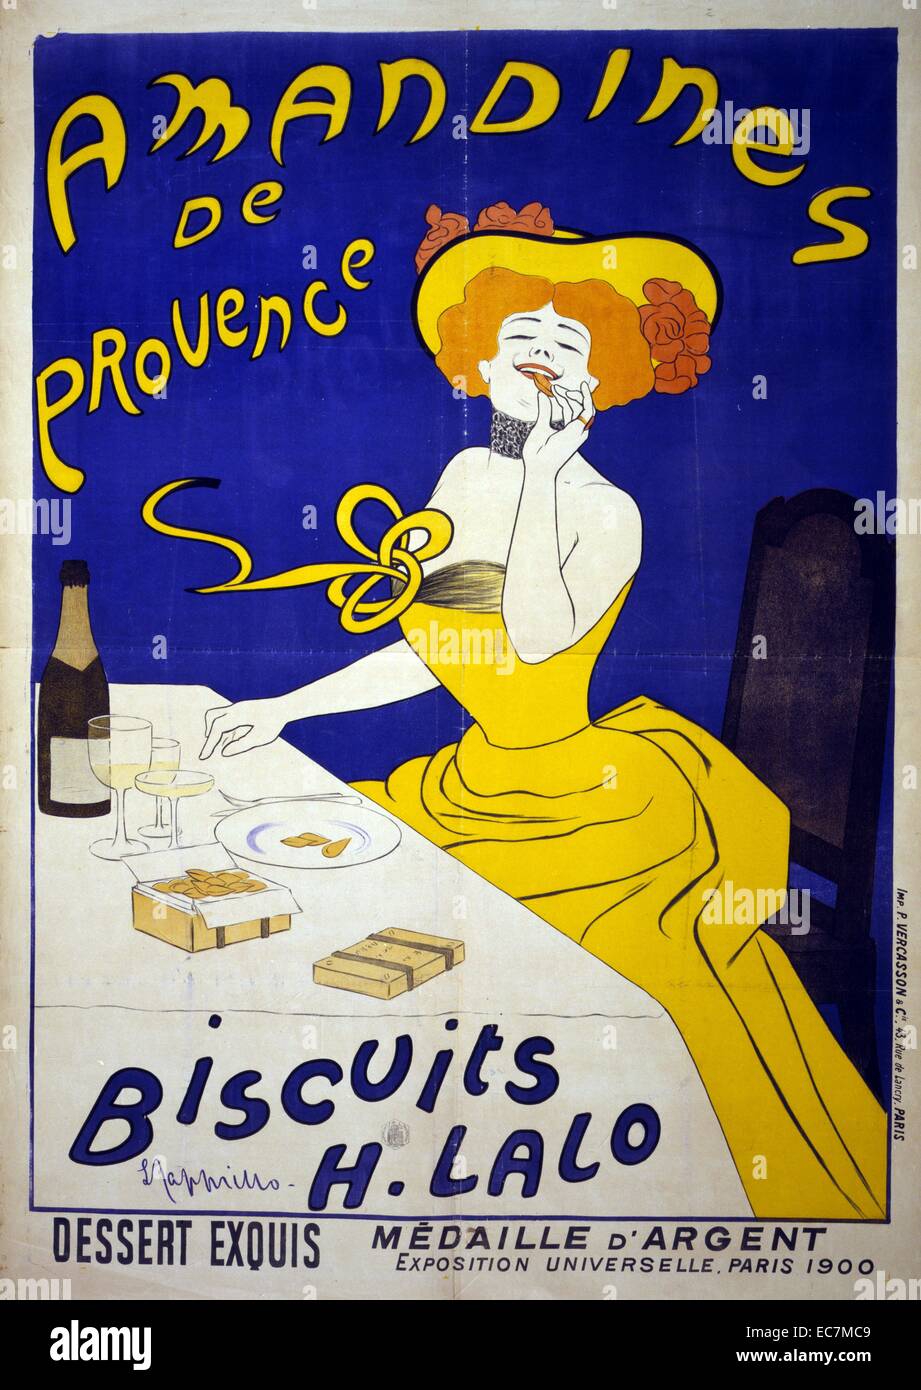 Amandines de Provence - Biscuits H. Lalo. A poster from the Paris Exposition advertising French food and showing a woman eating almond biscuits. Stock Photo